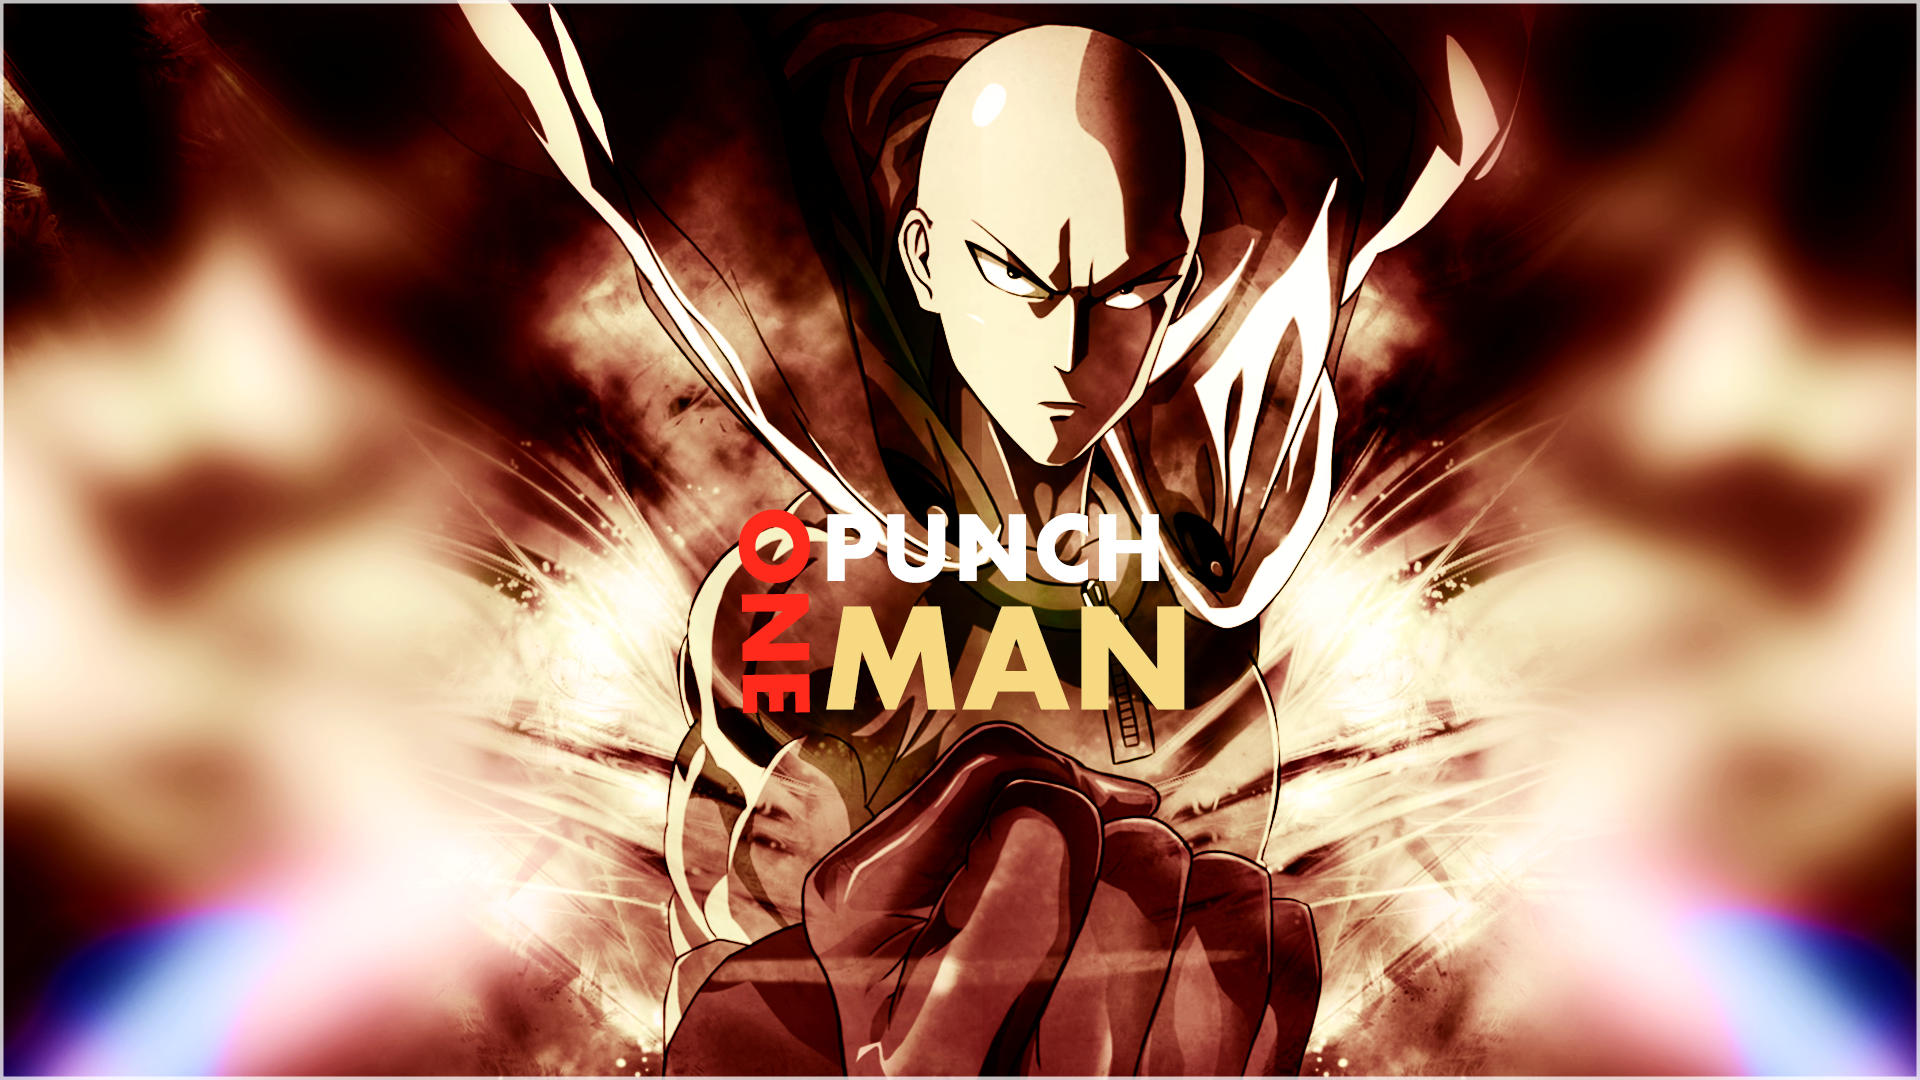 chrissy lax recommends One Punch Man 1080p